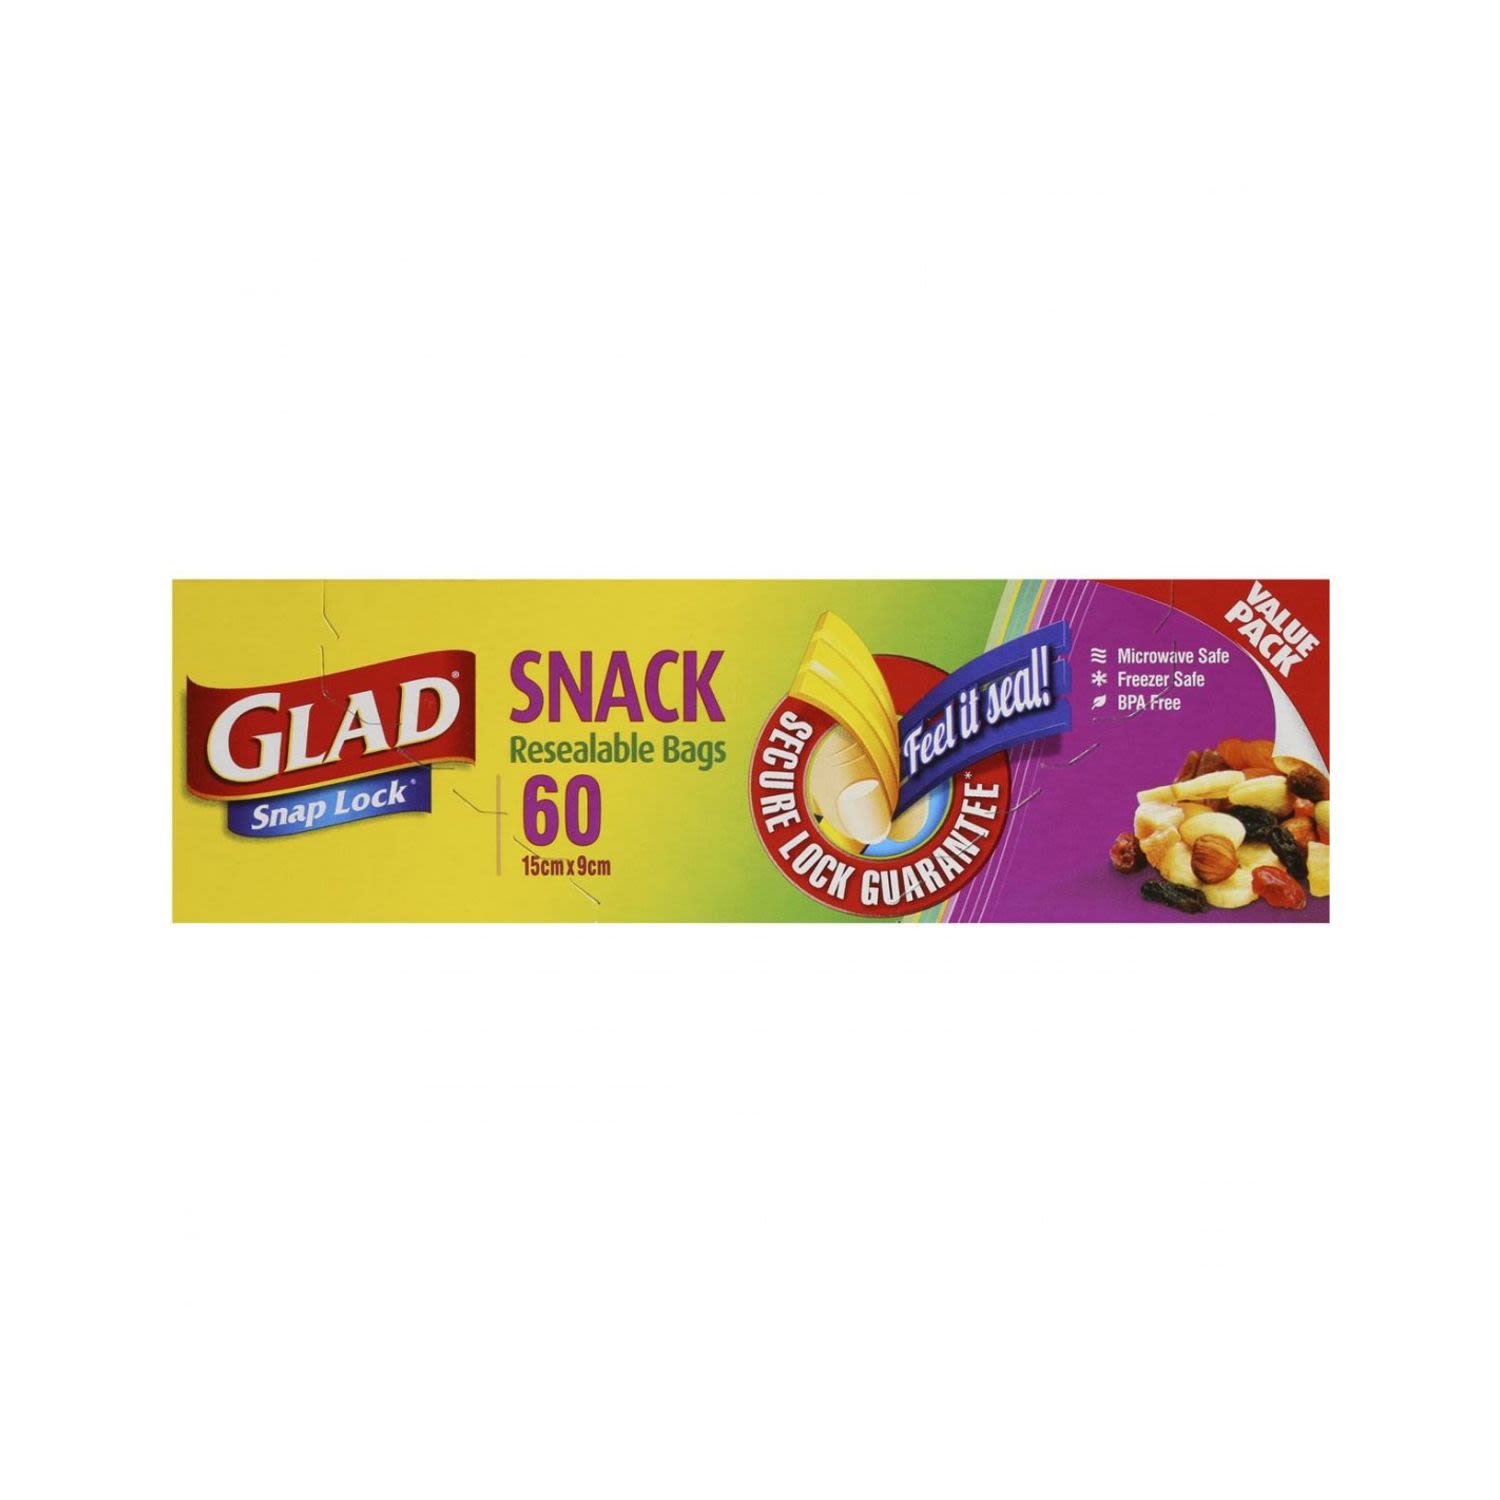 Glad Resealable Snack Bags, 60 Each